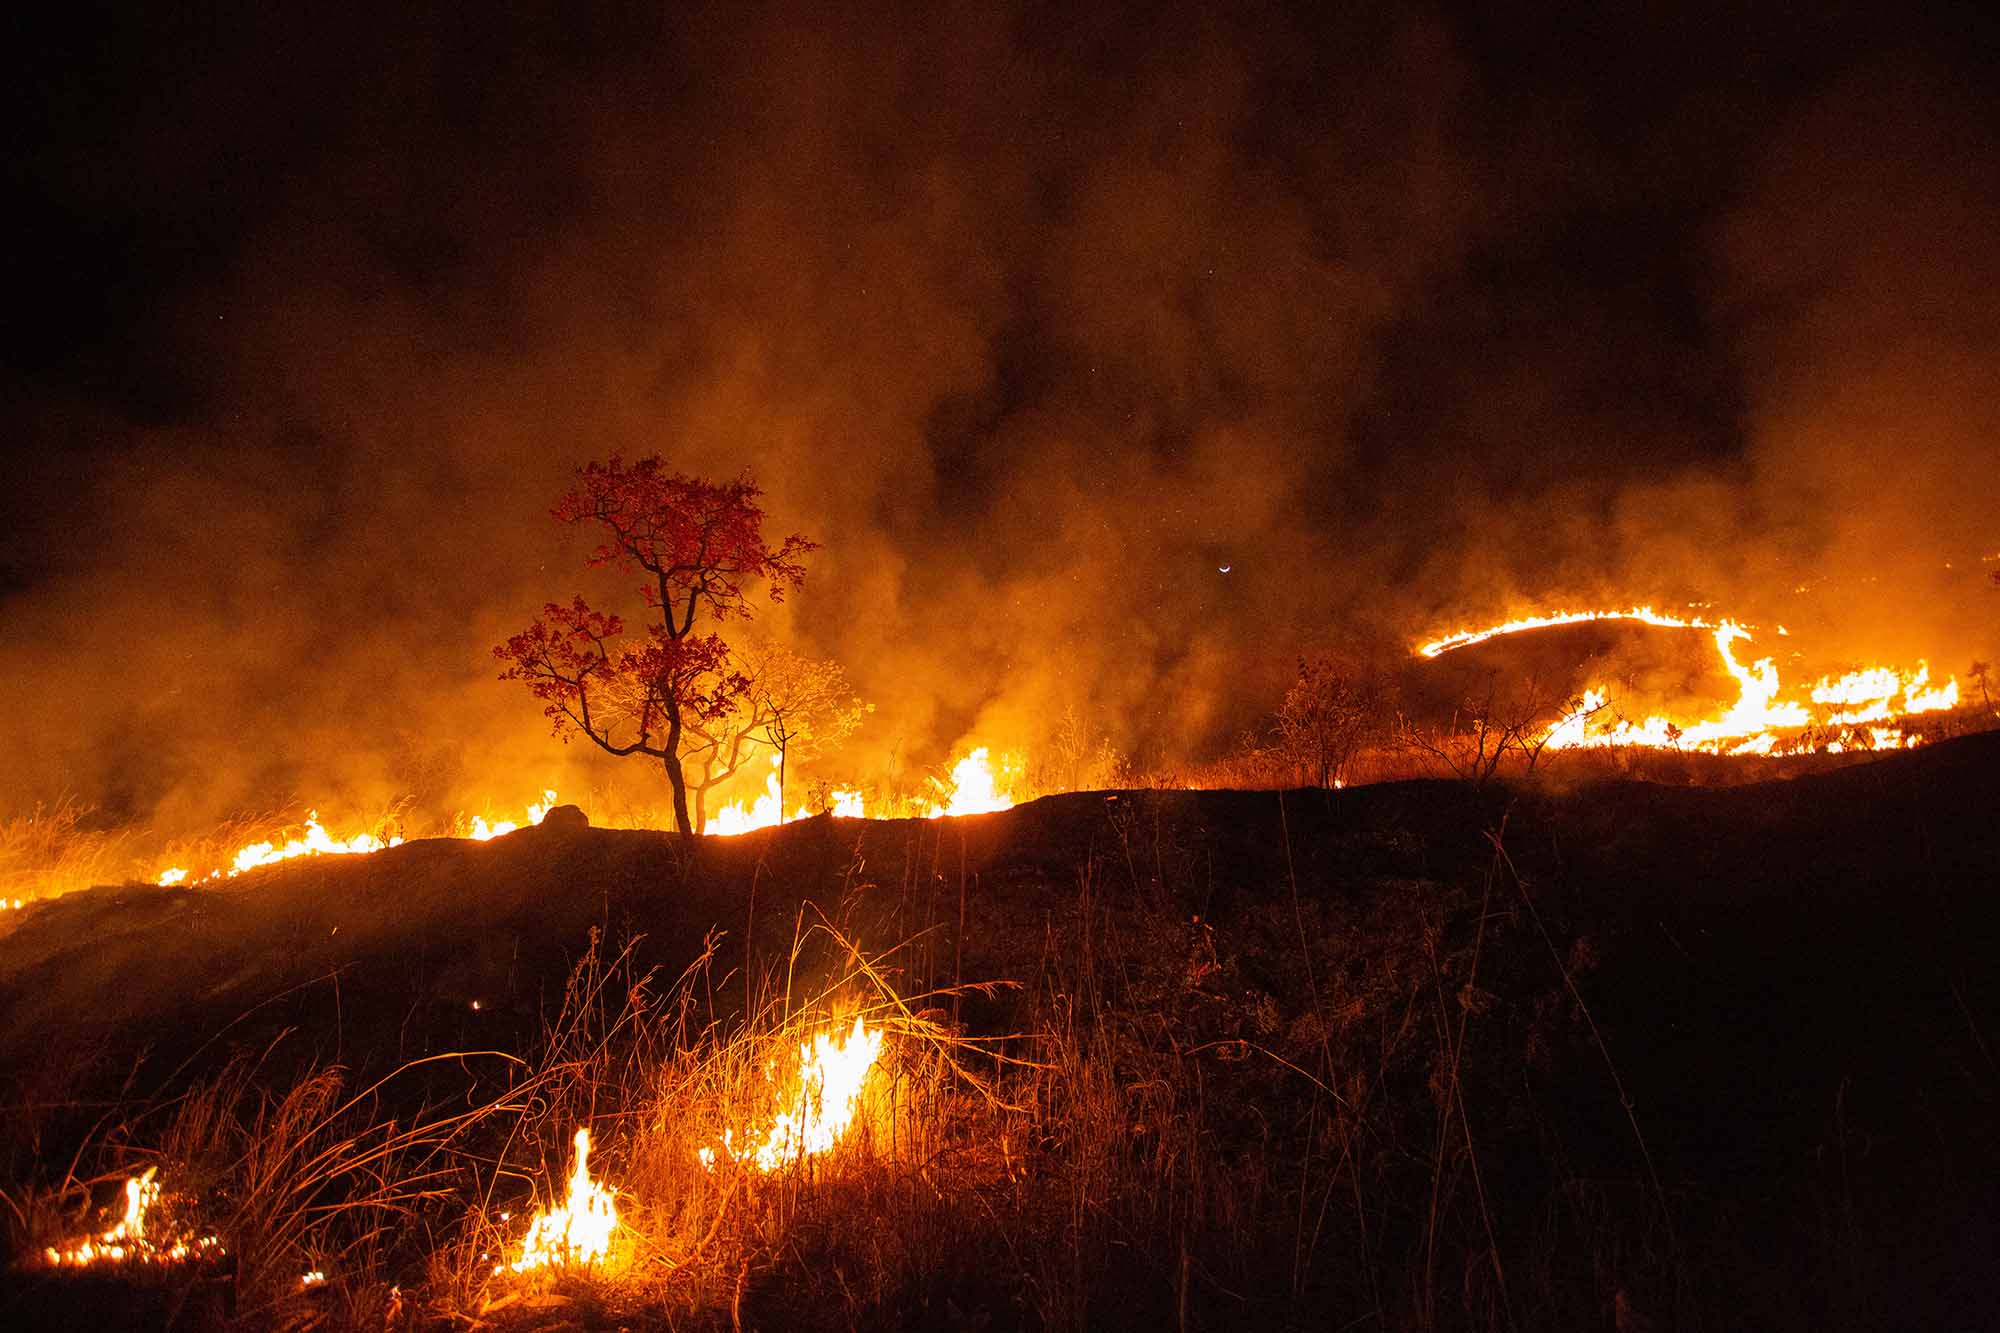 A bright orange fire burns on a hill as smoke rises on blackened earth.